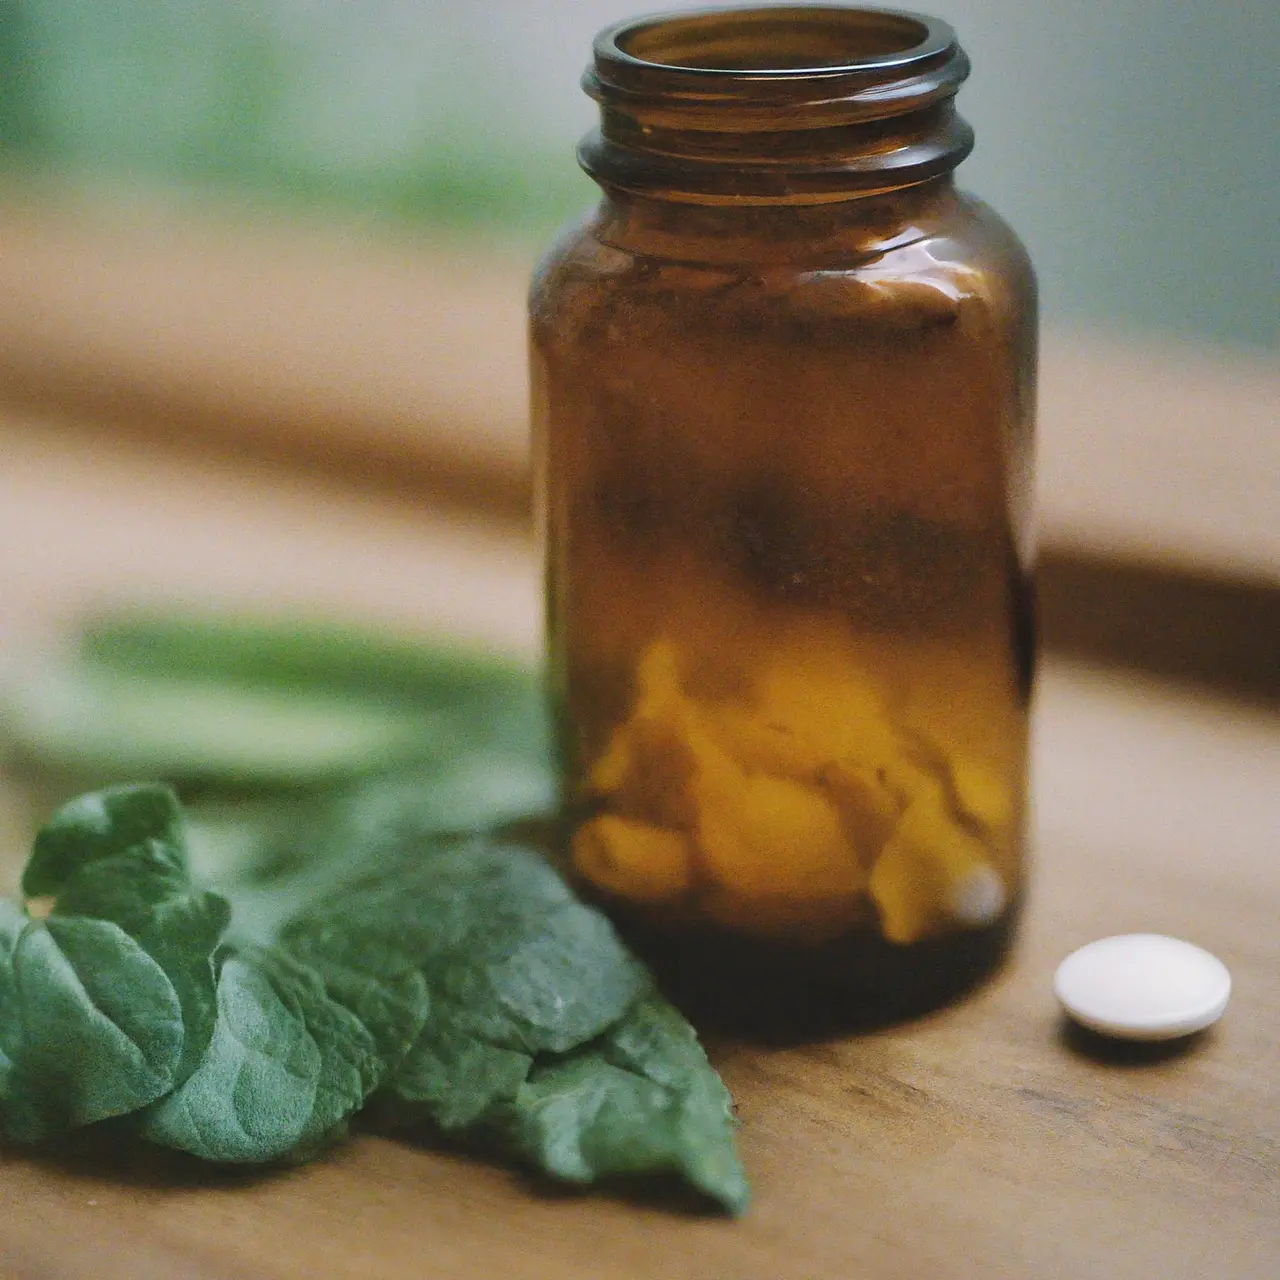 Pill bottles and herbal leaves on a wooden surface. 35mm stock photo